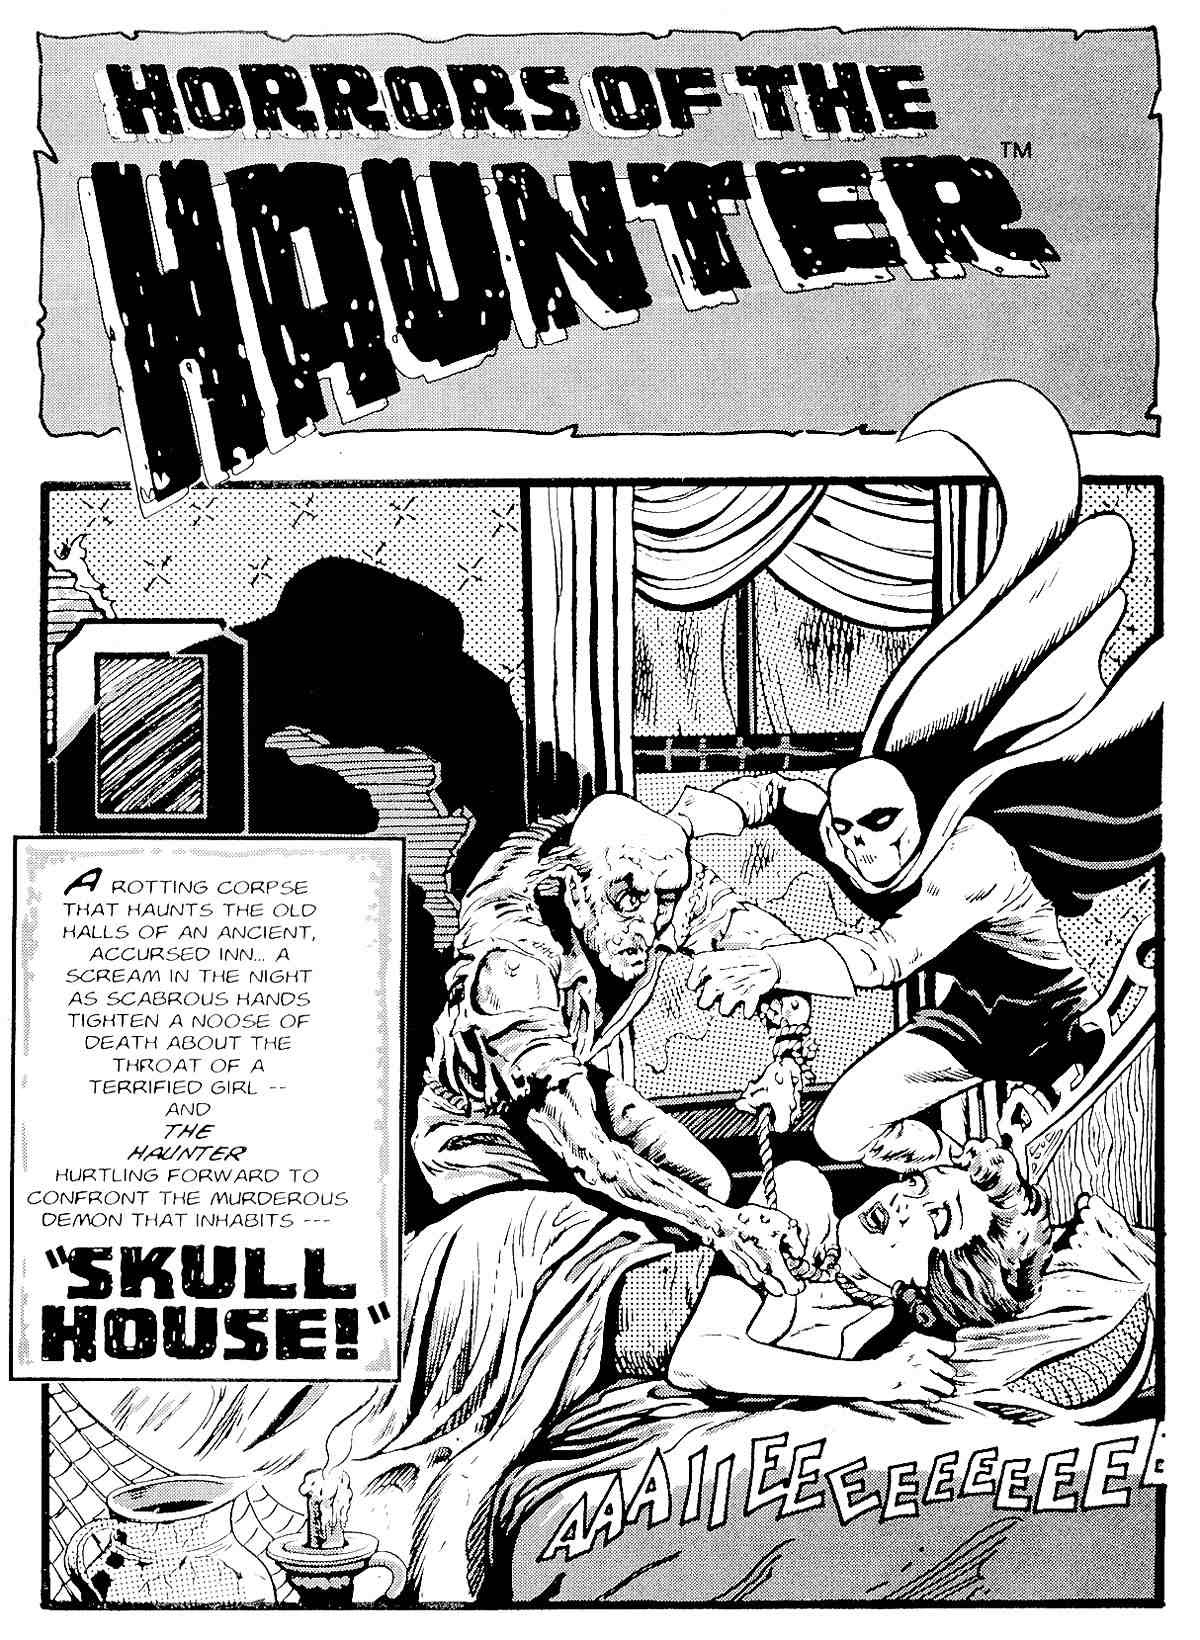 Read online Horrors of the Haunter comic -  Issue # Full - 12